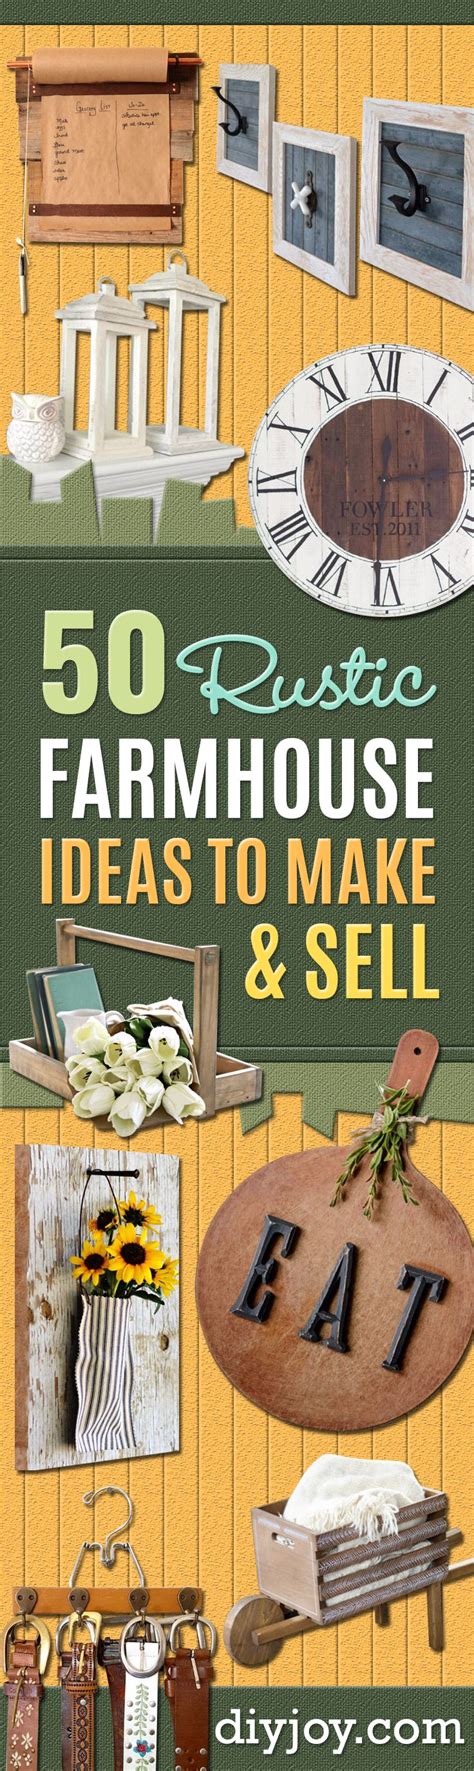 50 Rustic Diy Farmhouse Crafts To Make And Sell Rustic Crafts Rustic